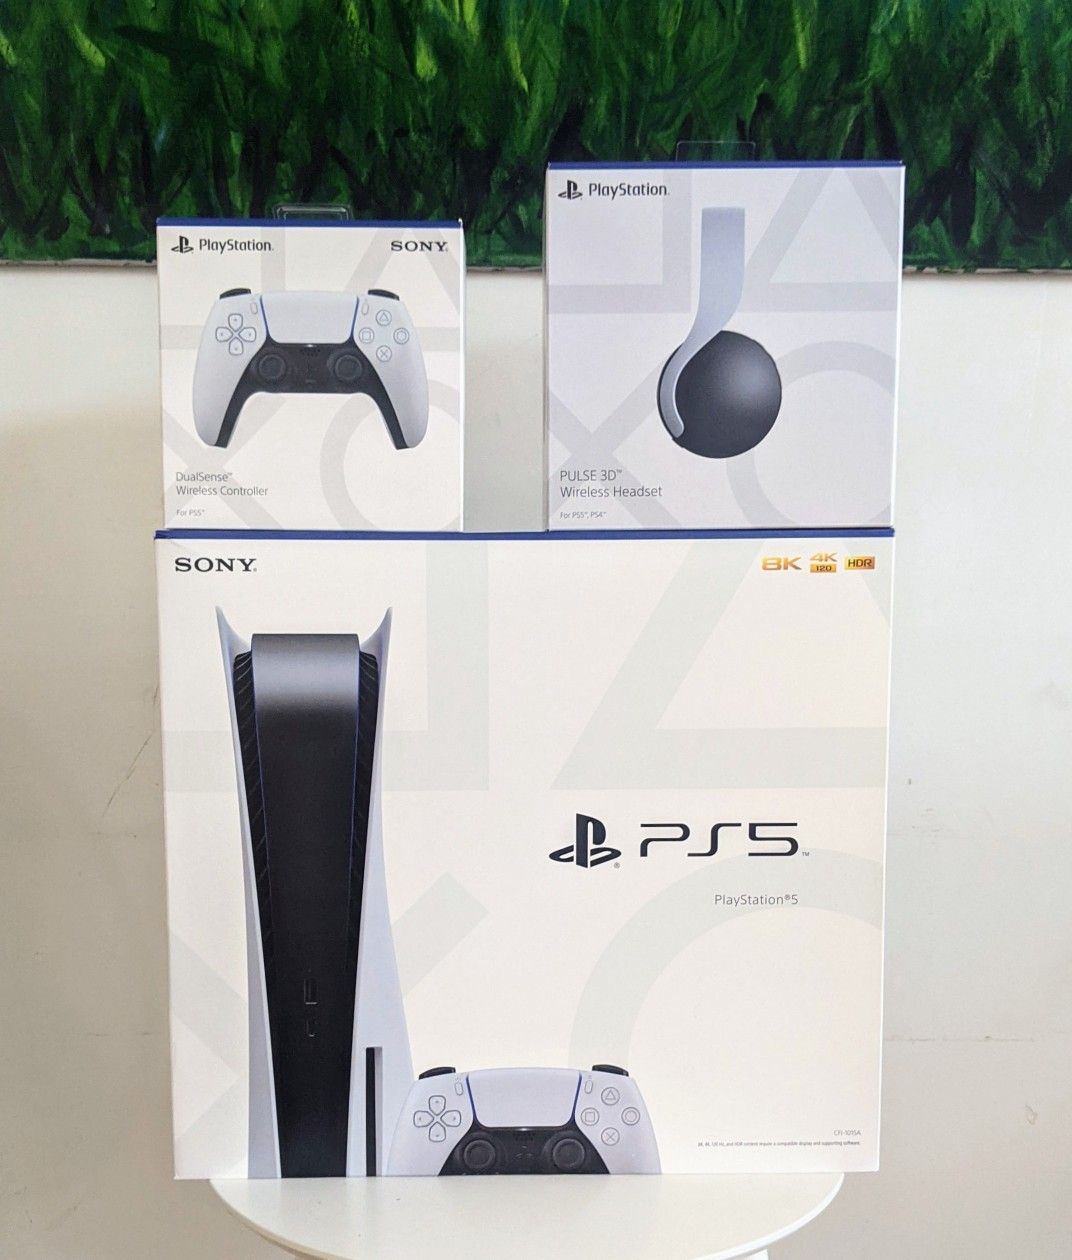 Playstation 5 Disc Edition with EXTRA Controller and PULSE 3D Wireless Headset